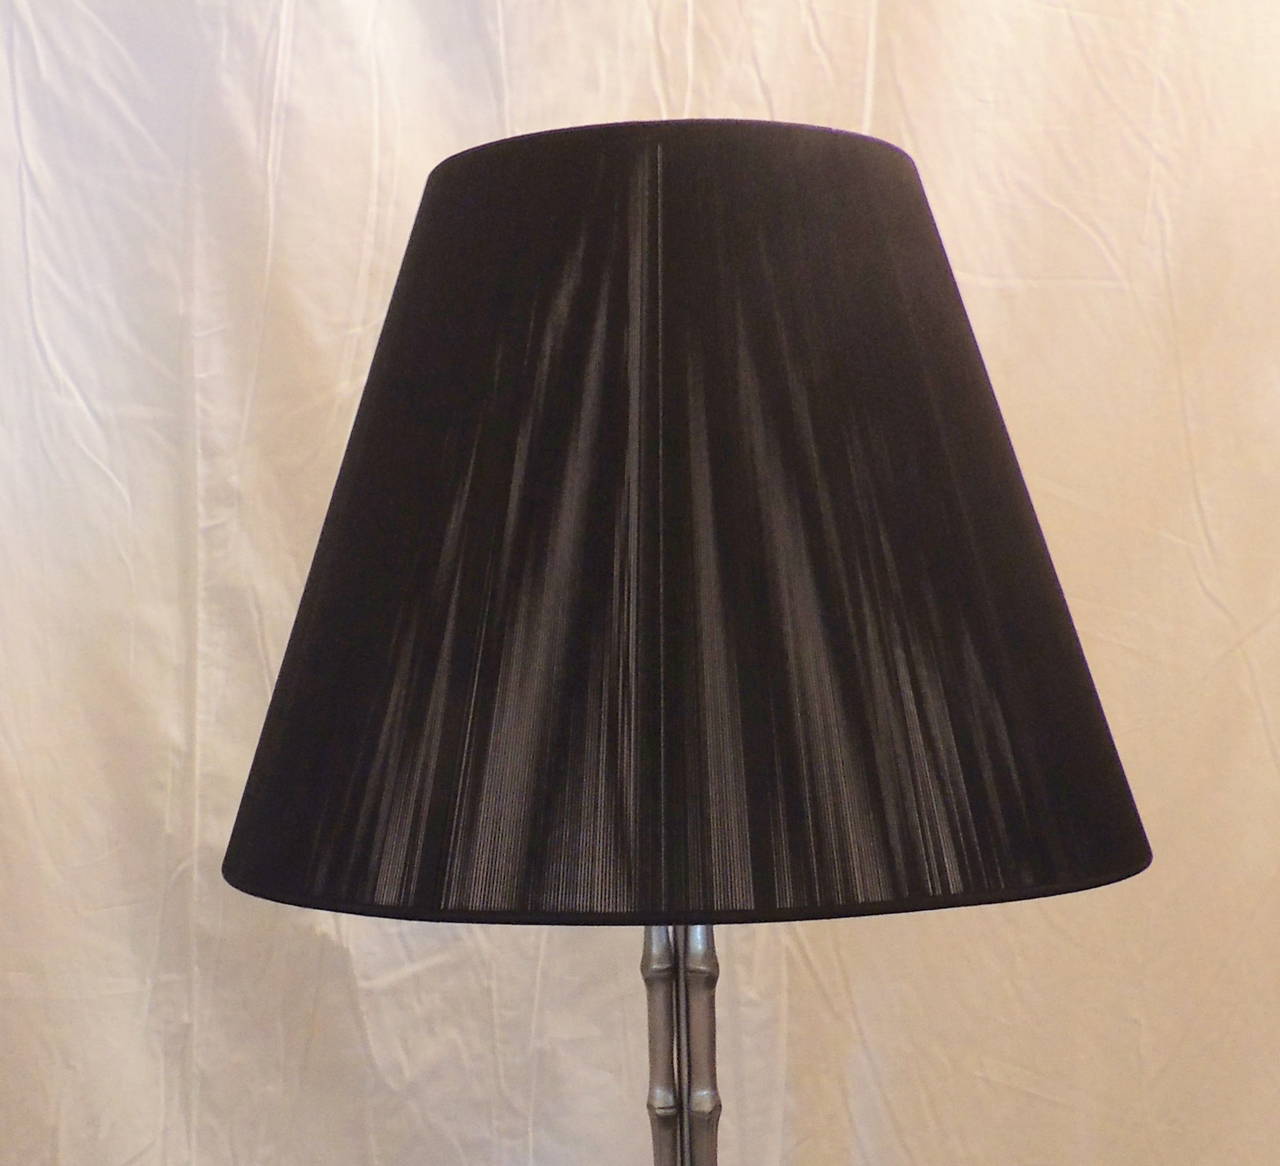 Beautiful re-silvered bronze faux bamboo styled lamp attributed to Maison Baguès, with wonderful unusual black fiber lampshade. Measure: A full 70